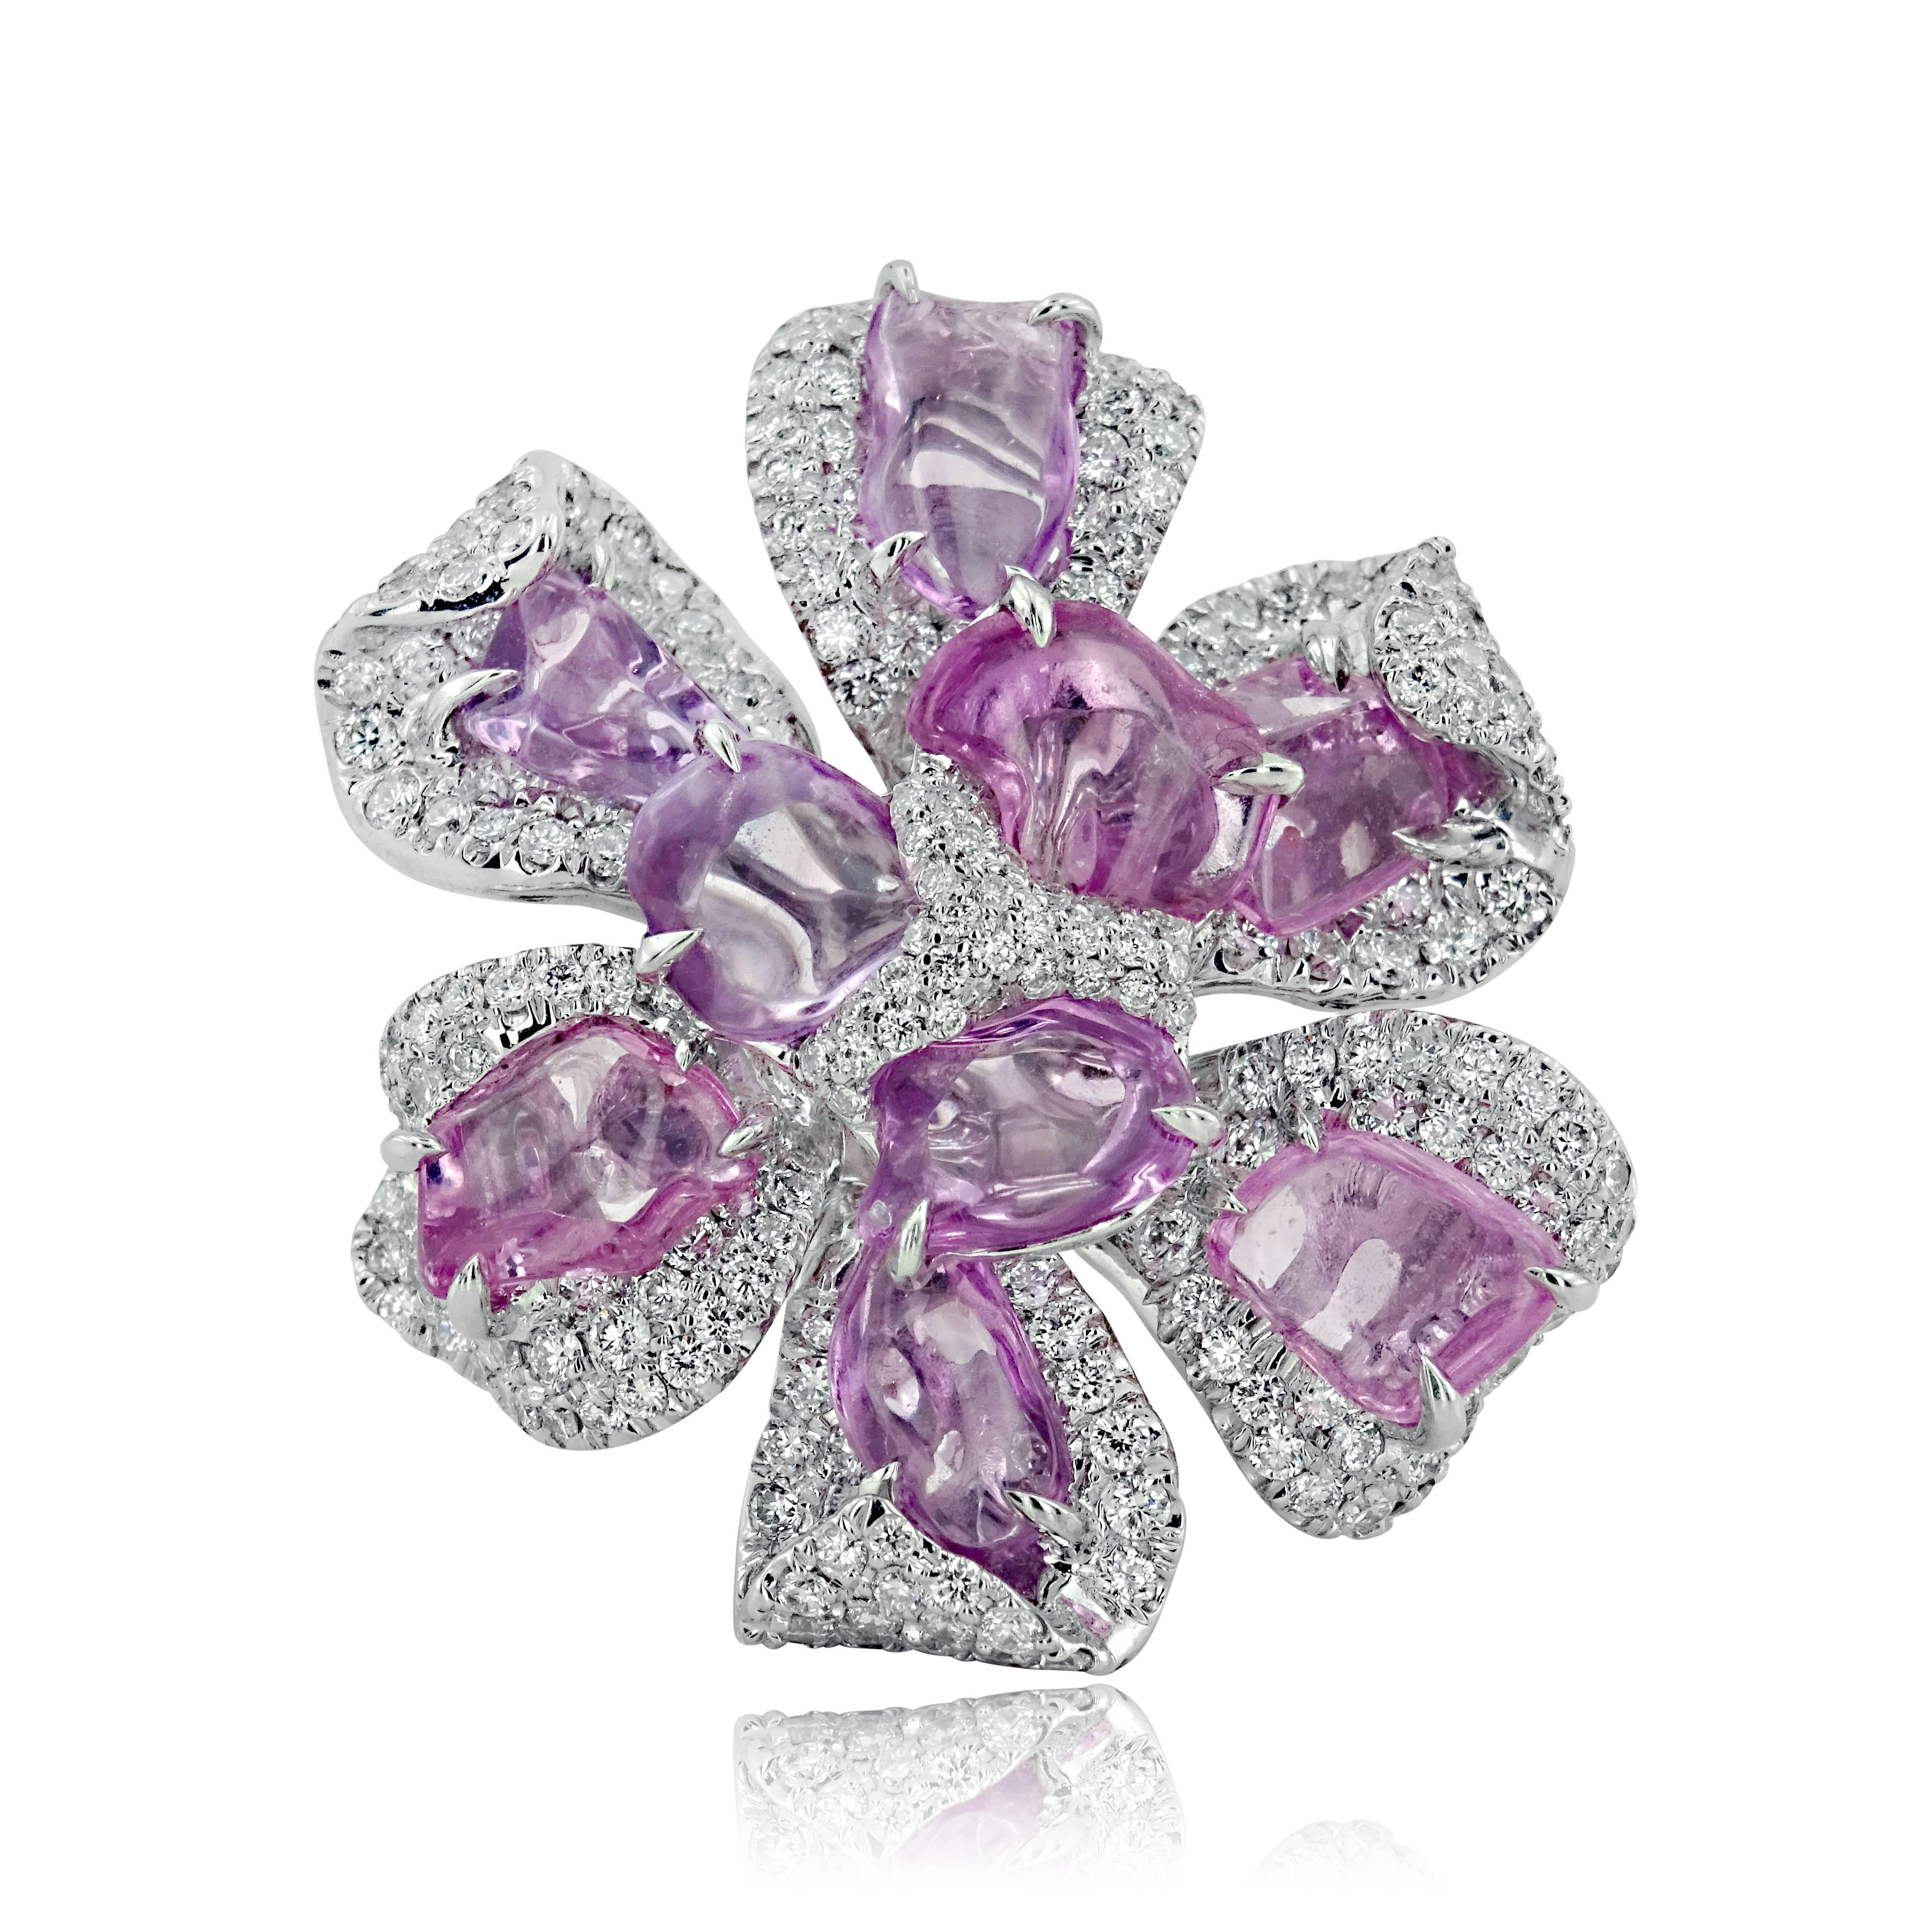 WHITE GOLD FANCY PINK AND PURPLE SAPPHIRE SET - 83.30 CT

18K White gold


Ring

Total sapphire weight: 9.50 ct
[ 9 stones ]
Color: Purple and Pink
Origin: Madagascar

Total diamond weight: 4.50 ct
[ 512 diamonds ]
Color: G-H
Clarity: